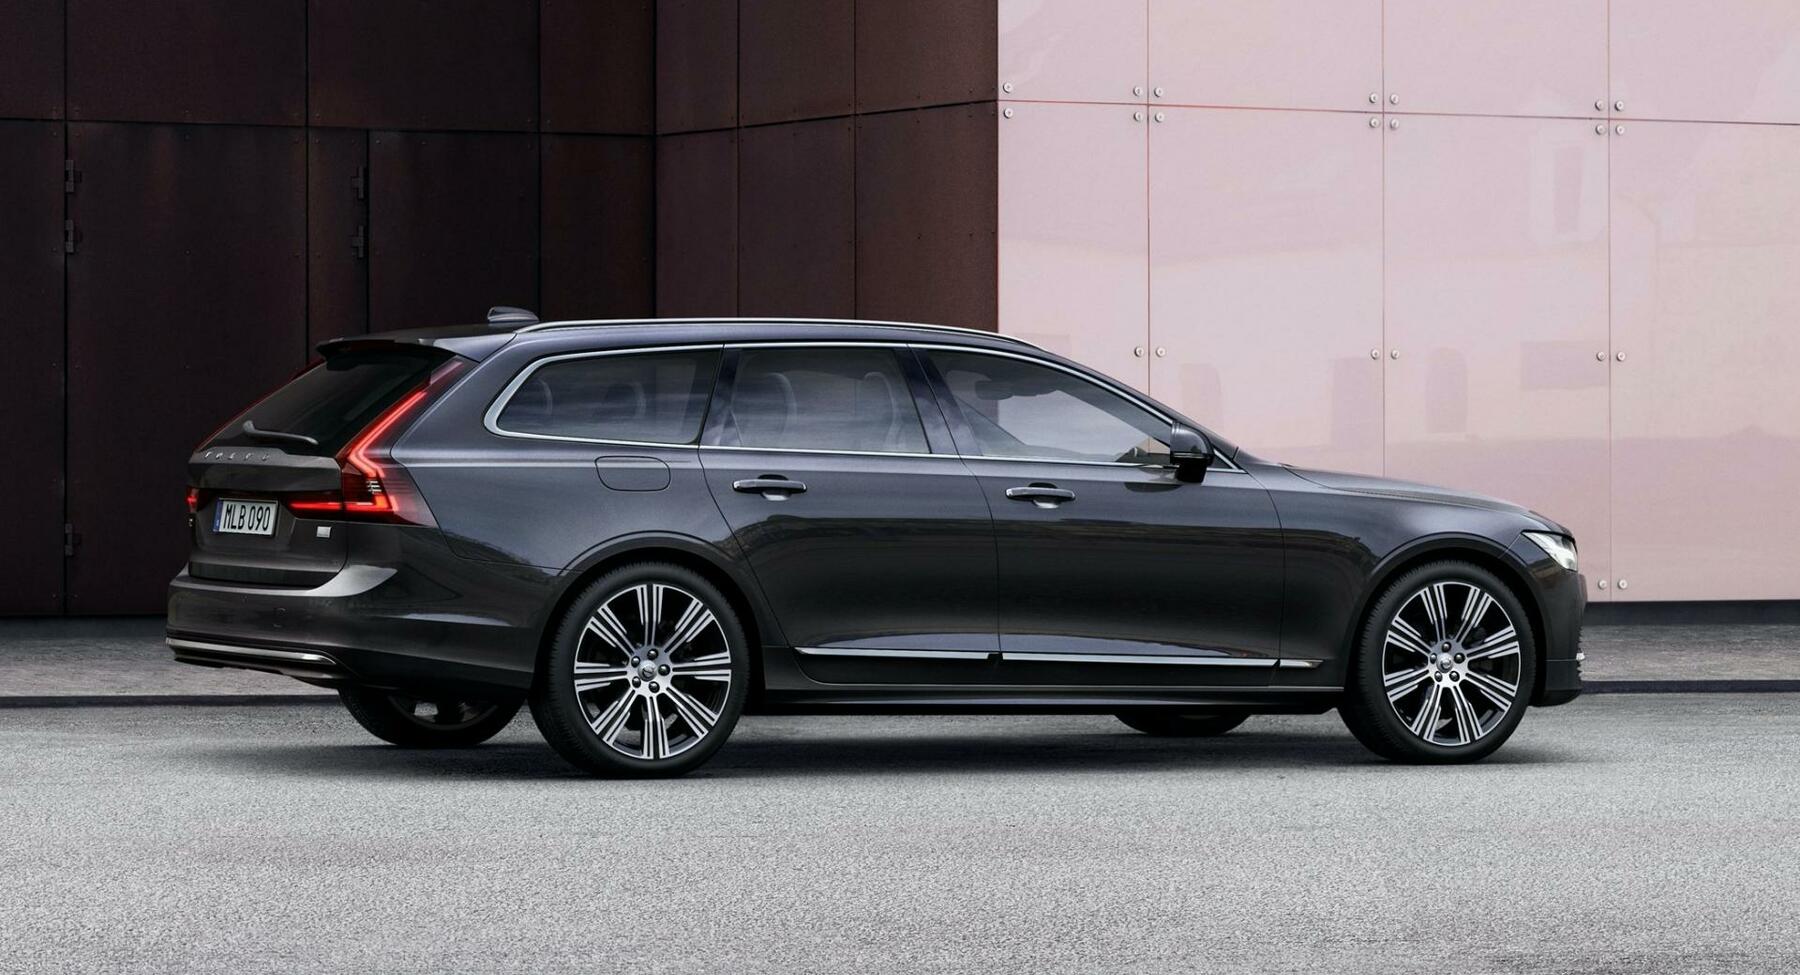 Volvo V90 Cross Country 2.0 D4 (190 Hp) AWD Automatic 2018, 2019, 2020